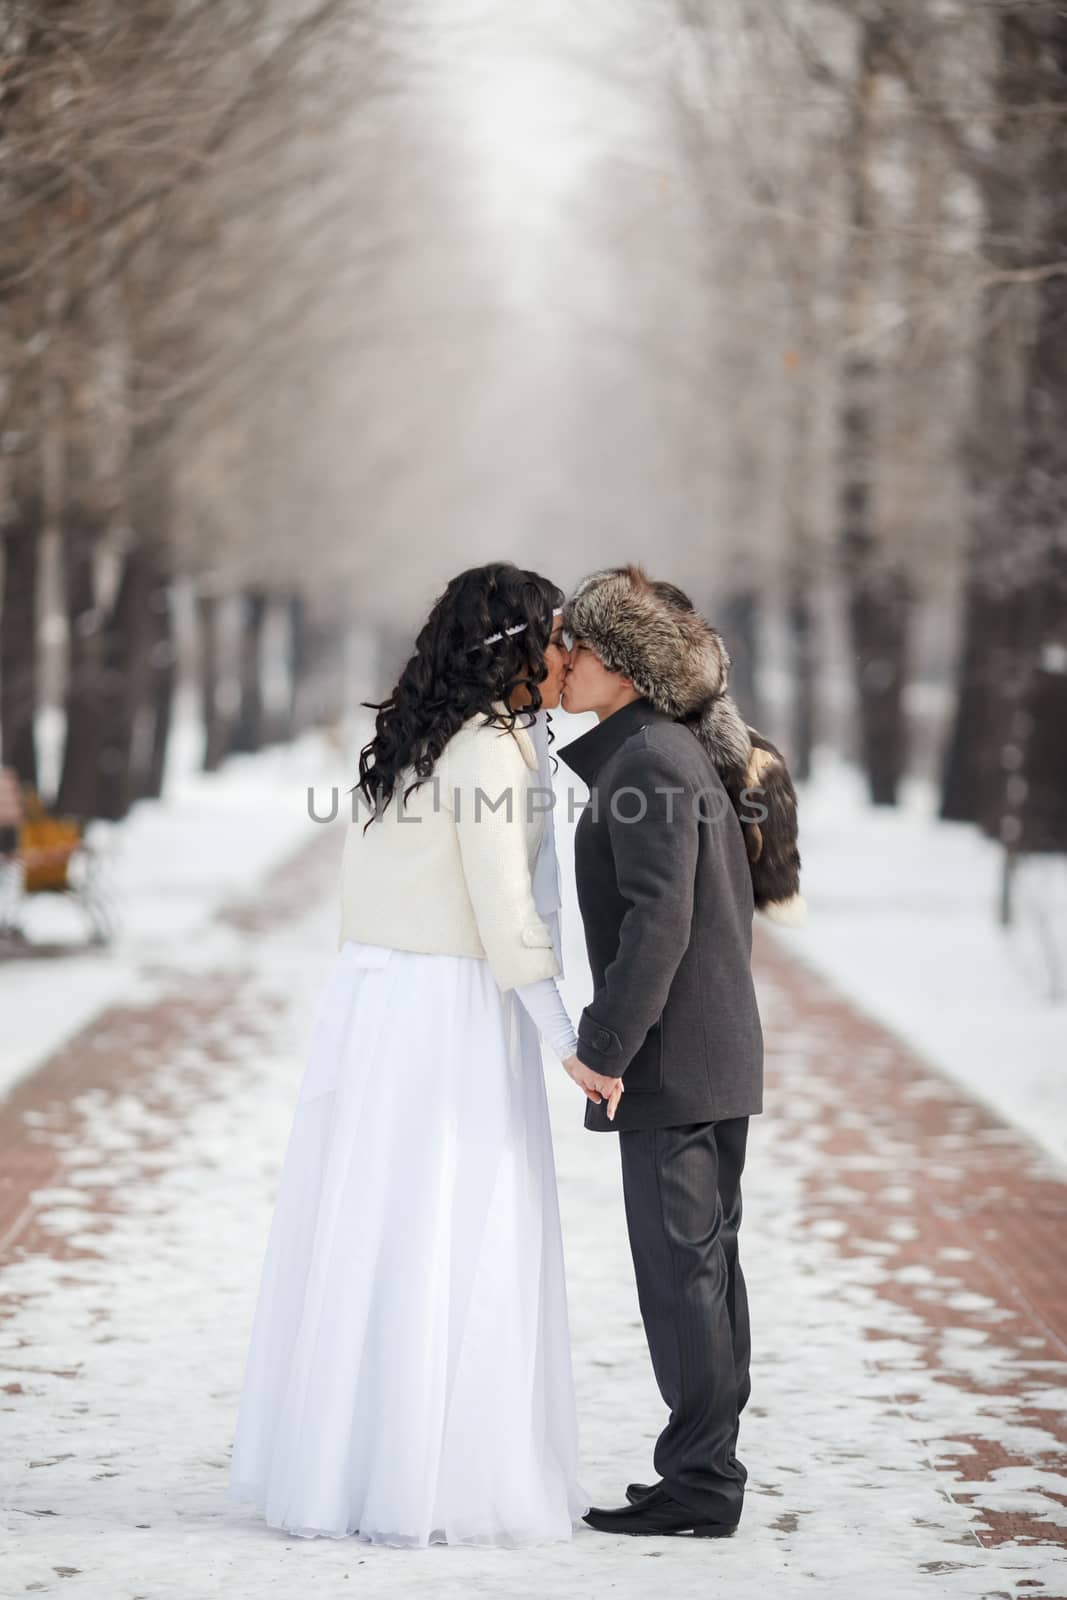 Asian bride and groom kissing in the middle of snowy winter alley. Young man wearing gray coat, fur hat, lady dressed with white wedding gown. Cold season warm dress. by Maynagashev